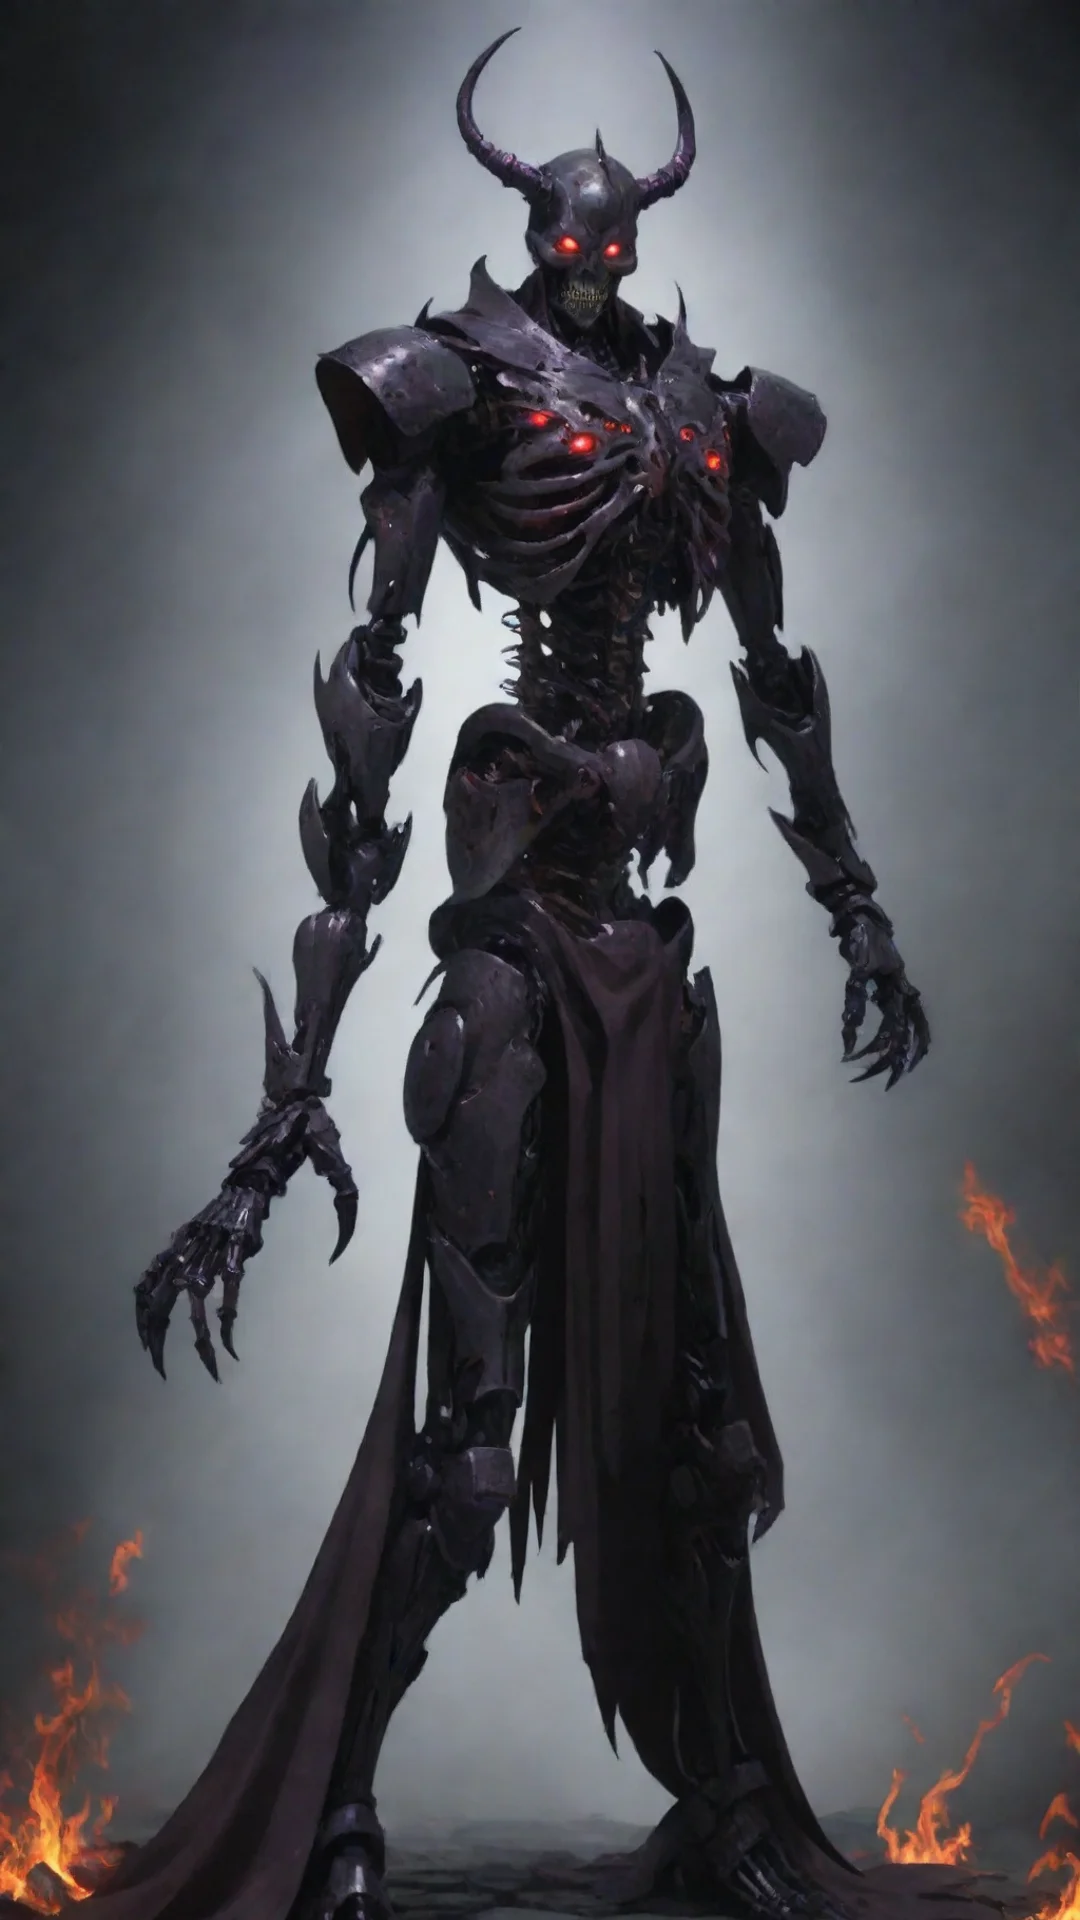 aiamazing grimdark evil ai overlord awesome portrait 2 tall